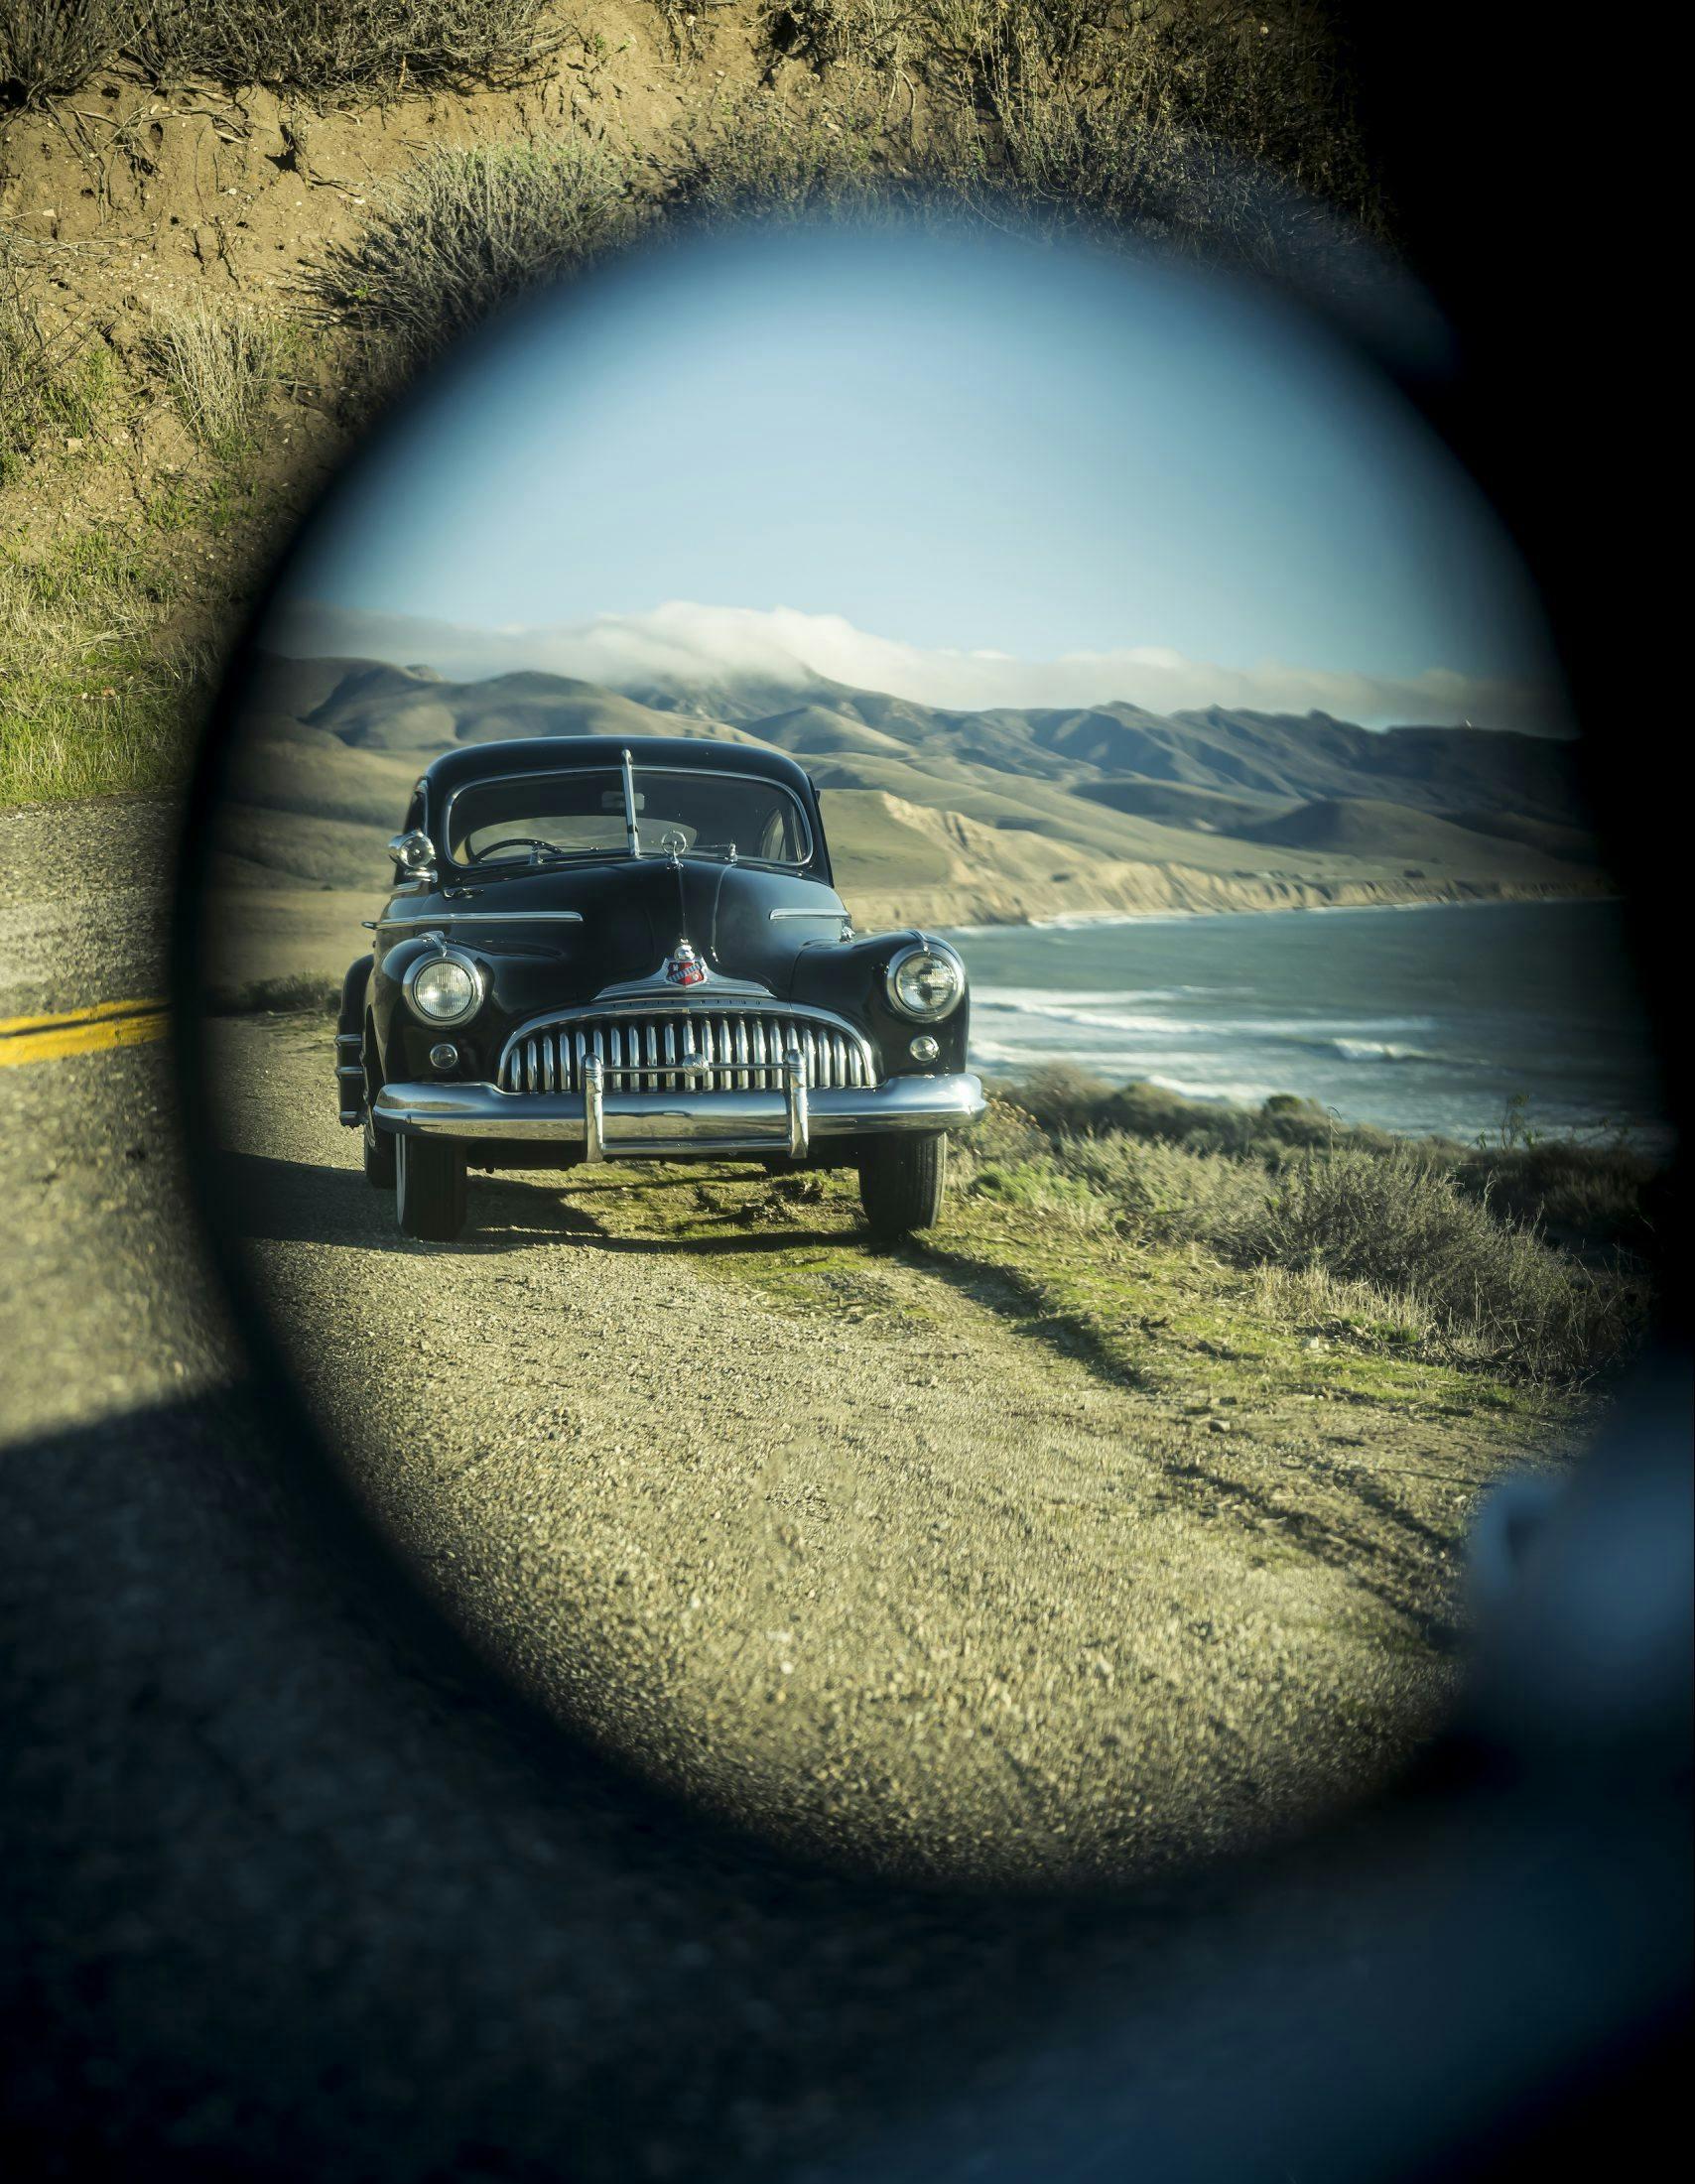 1946 Buick Special in rearview mirror